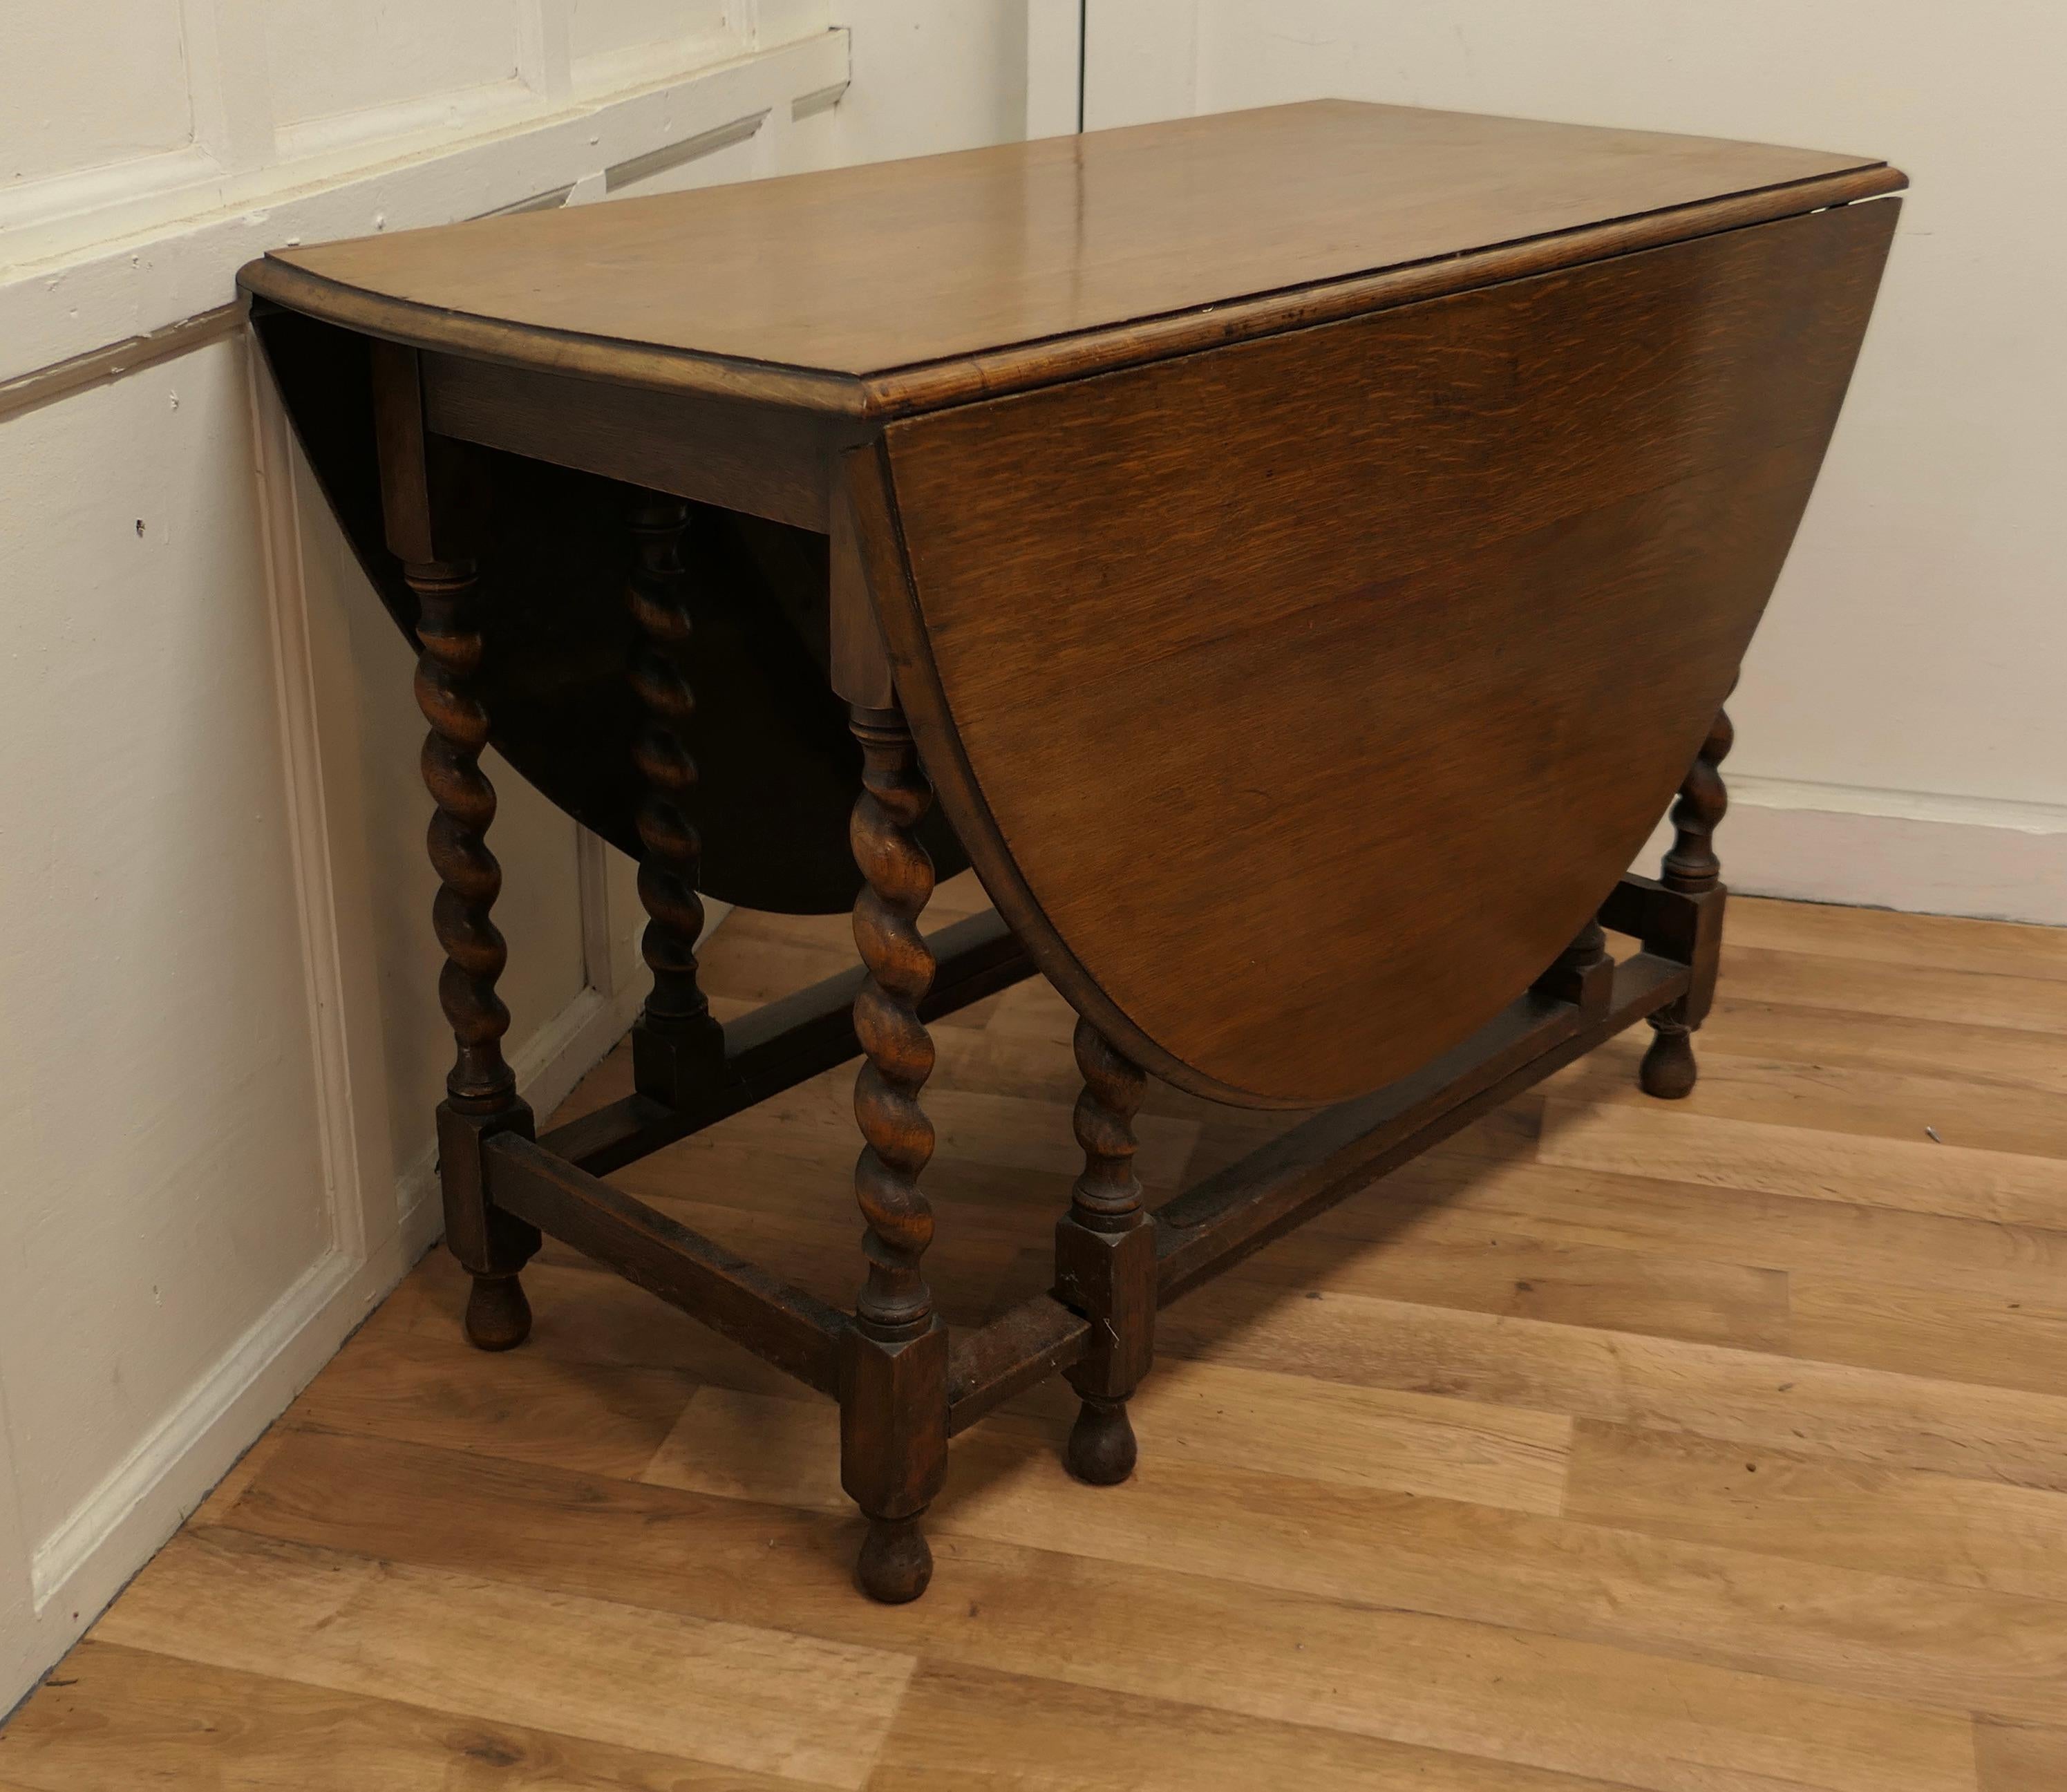 Good Victorian solid oak barley twist gate leg dining table

This is a good solid oak Victorian gate leg table, it 5ft long when open and will seat 6 diners
The table is Oval and made from solid Oak it has elegant crisply turned barley twist legs